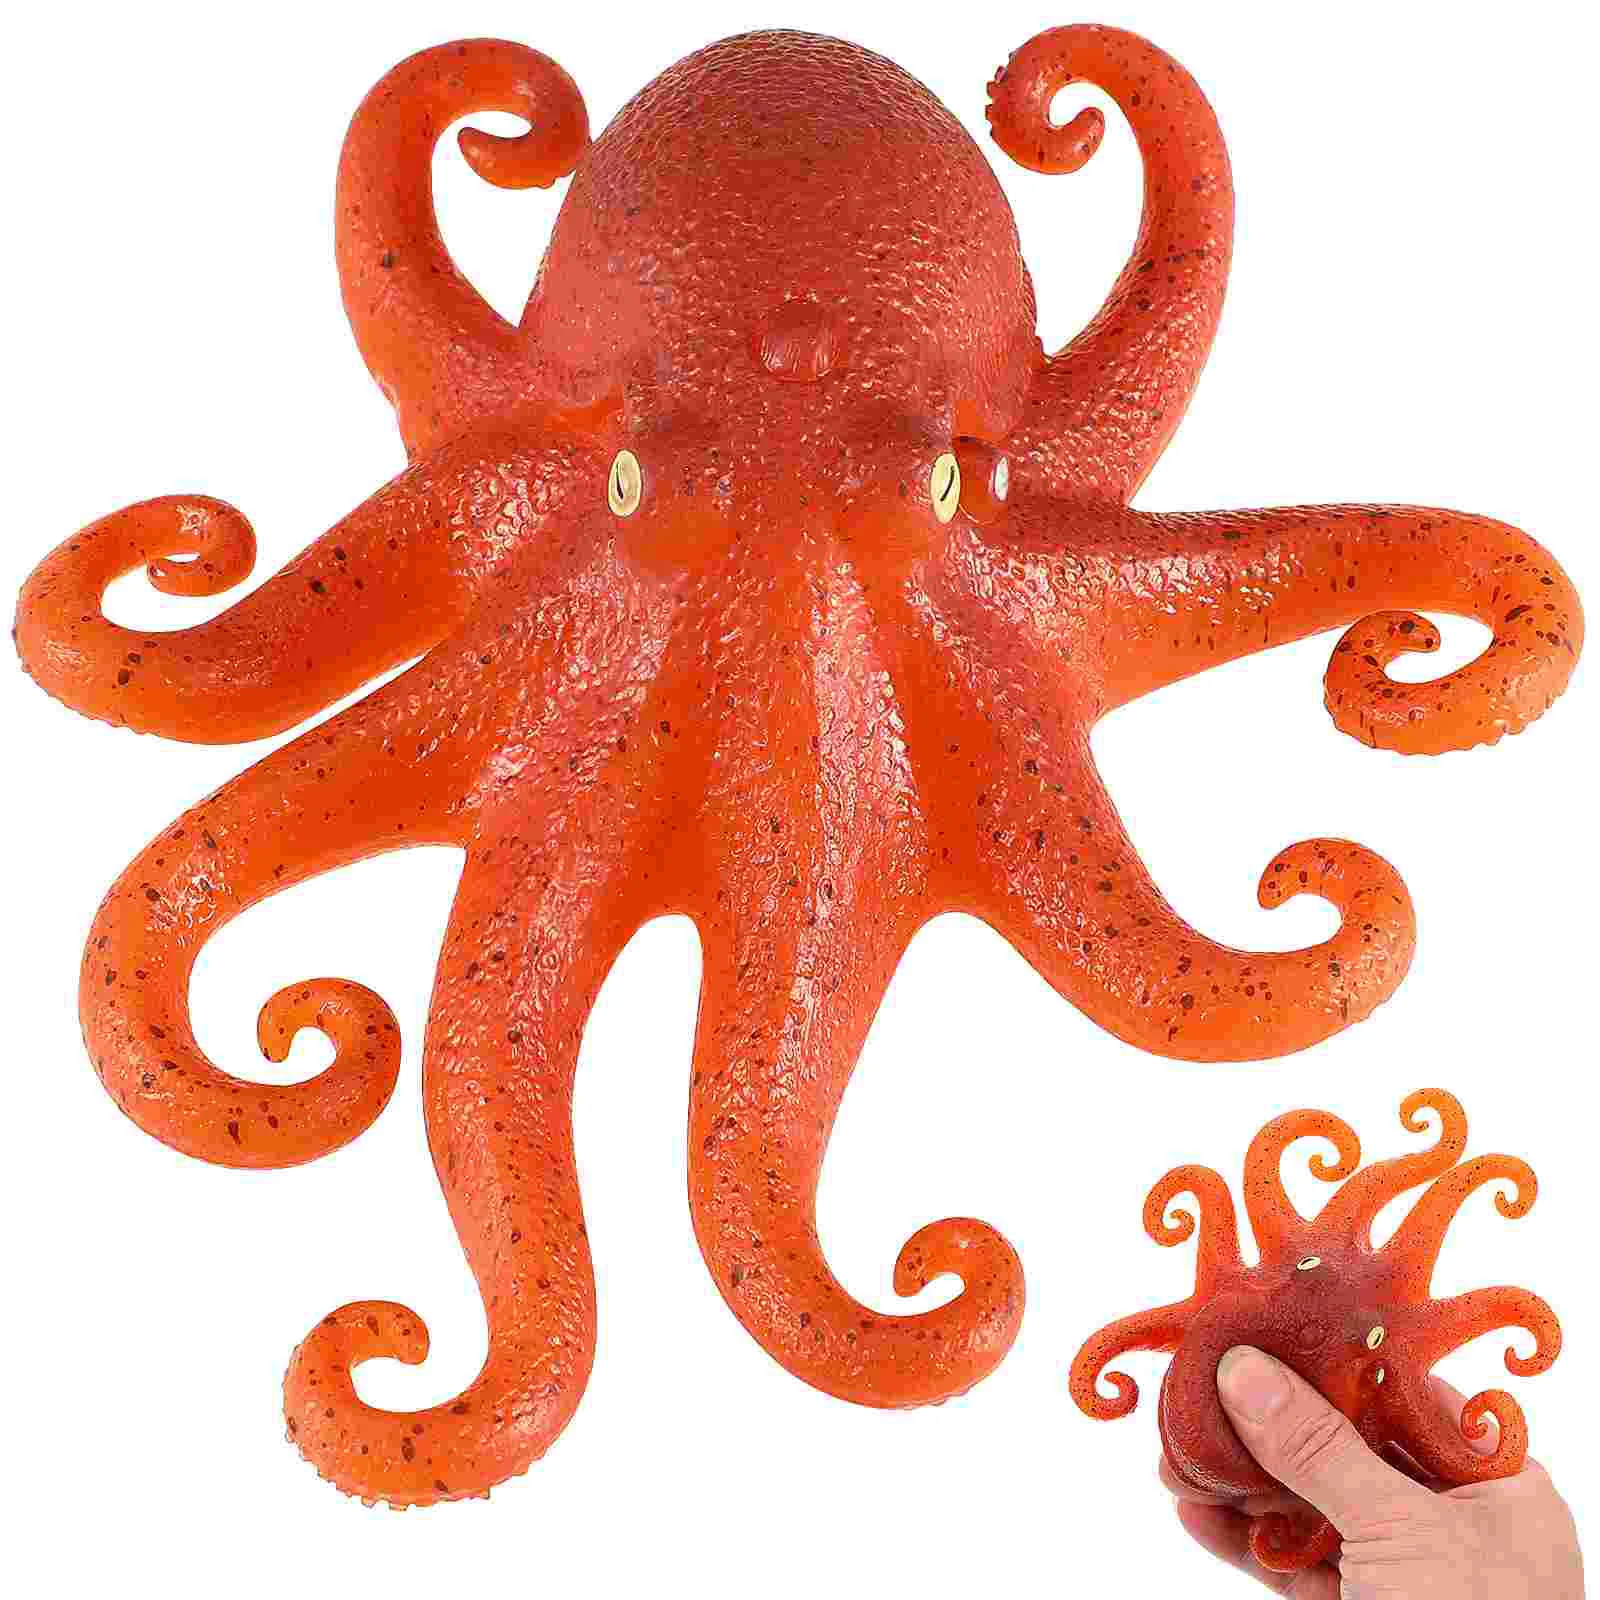 

Octopus Stress Relieve Toy Kids Playsets Toy Octopus Poppets Kids Puffer Fish Model Toy Stress Reliever Decompression Toy